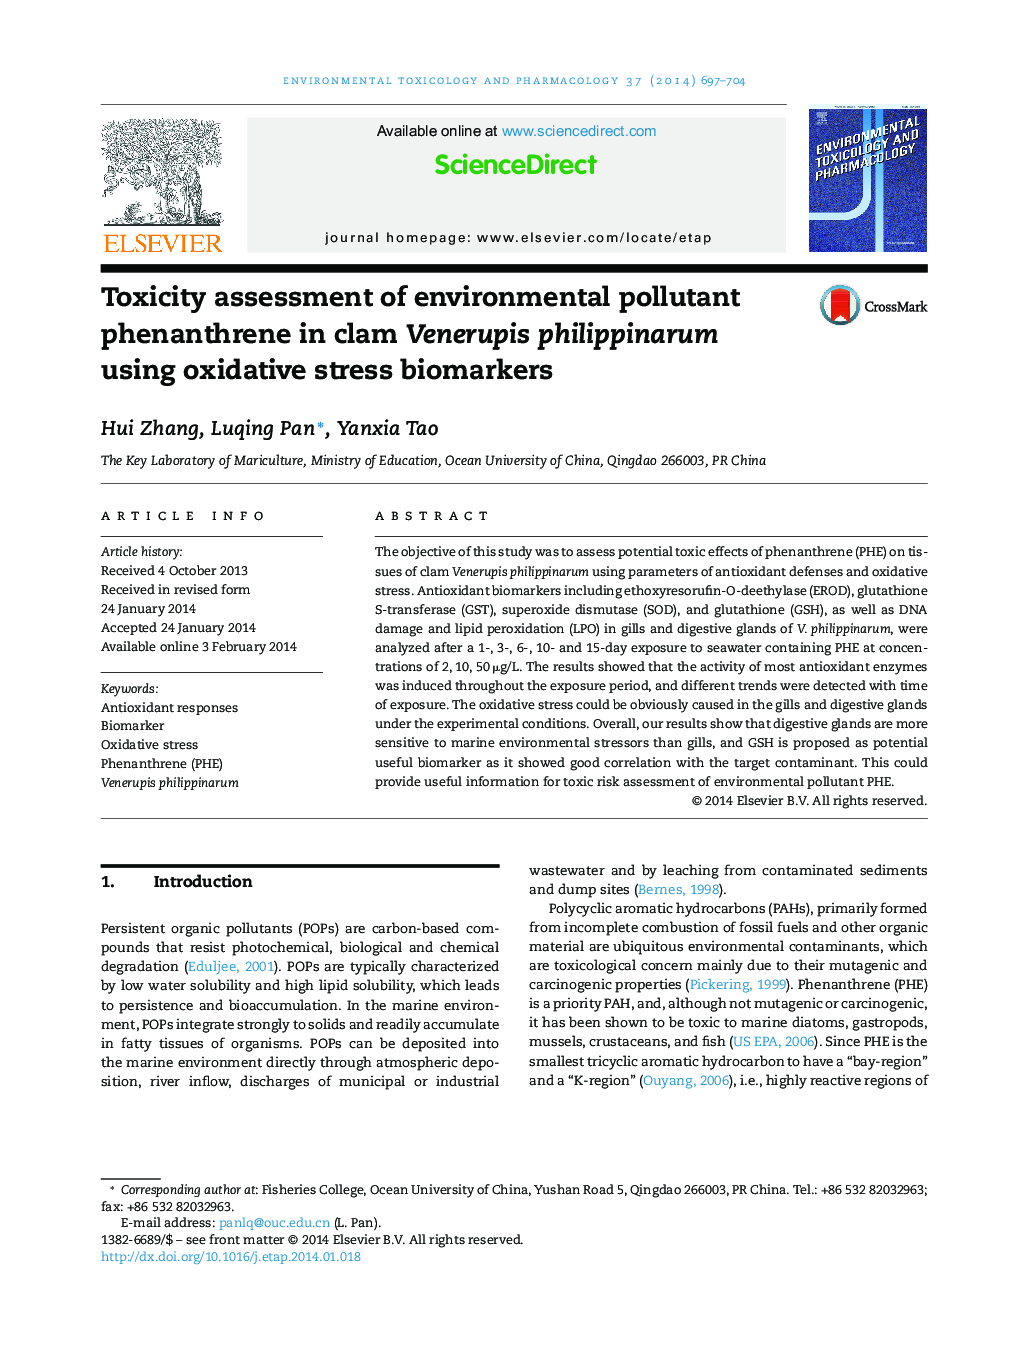 Toxicity assessment of environmental pollutant phenanthrene in clam Venerupis philippinarum using oxidative stress biomarkers